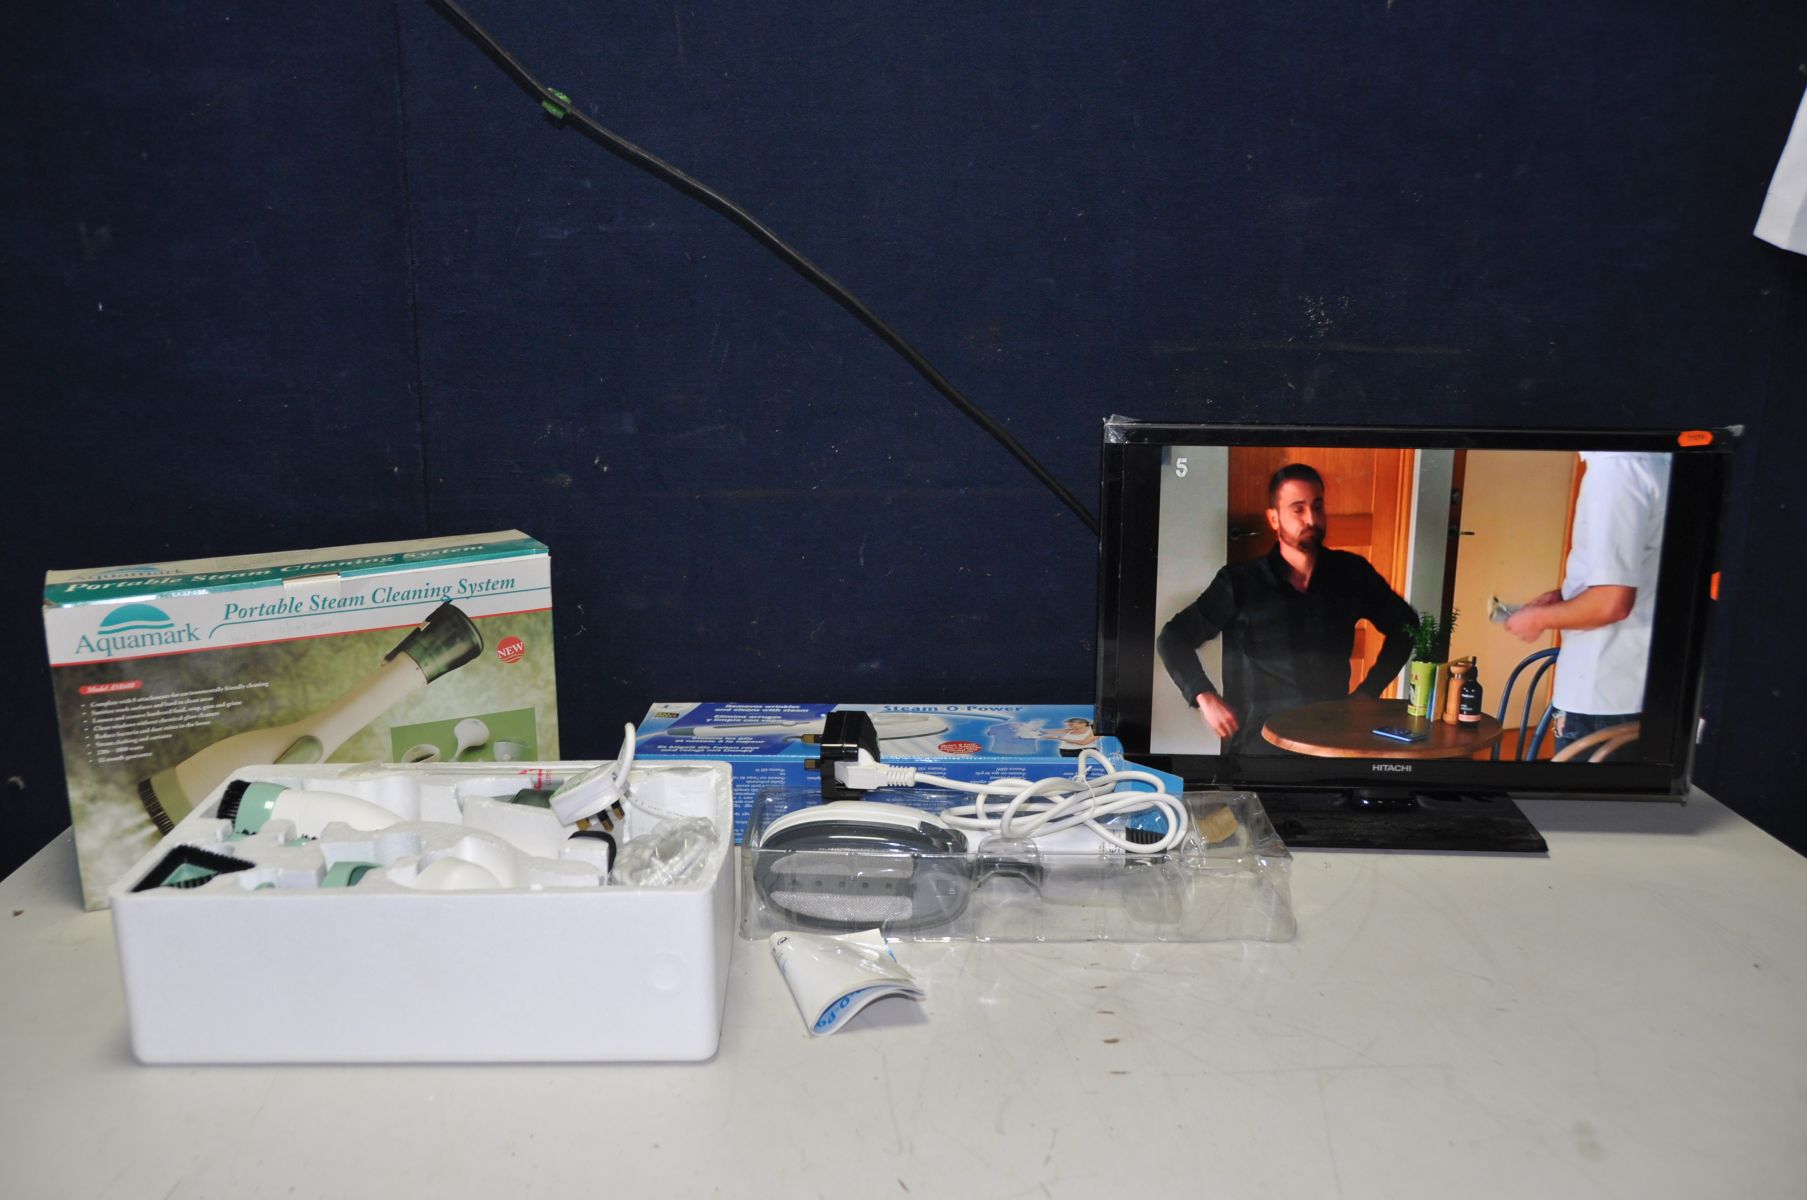 A HITATCHI 22HB11T06U 22in TV (no remote), Aquamark portable steam cleaning system in box and a